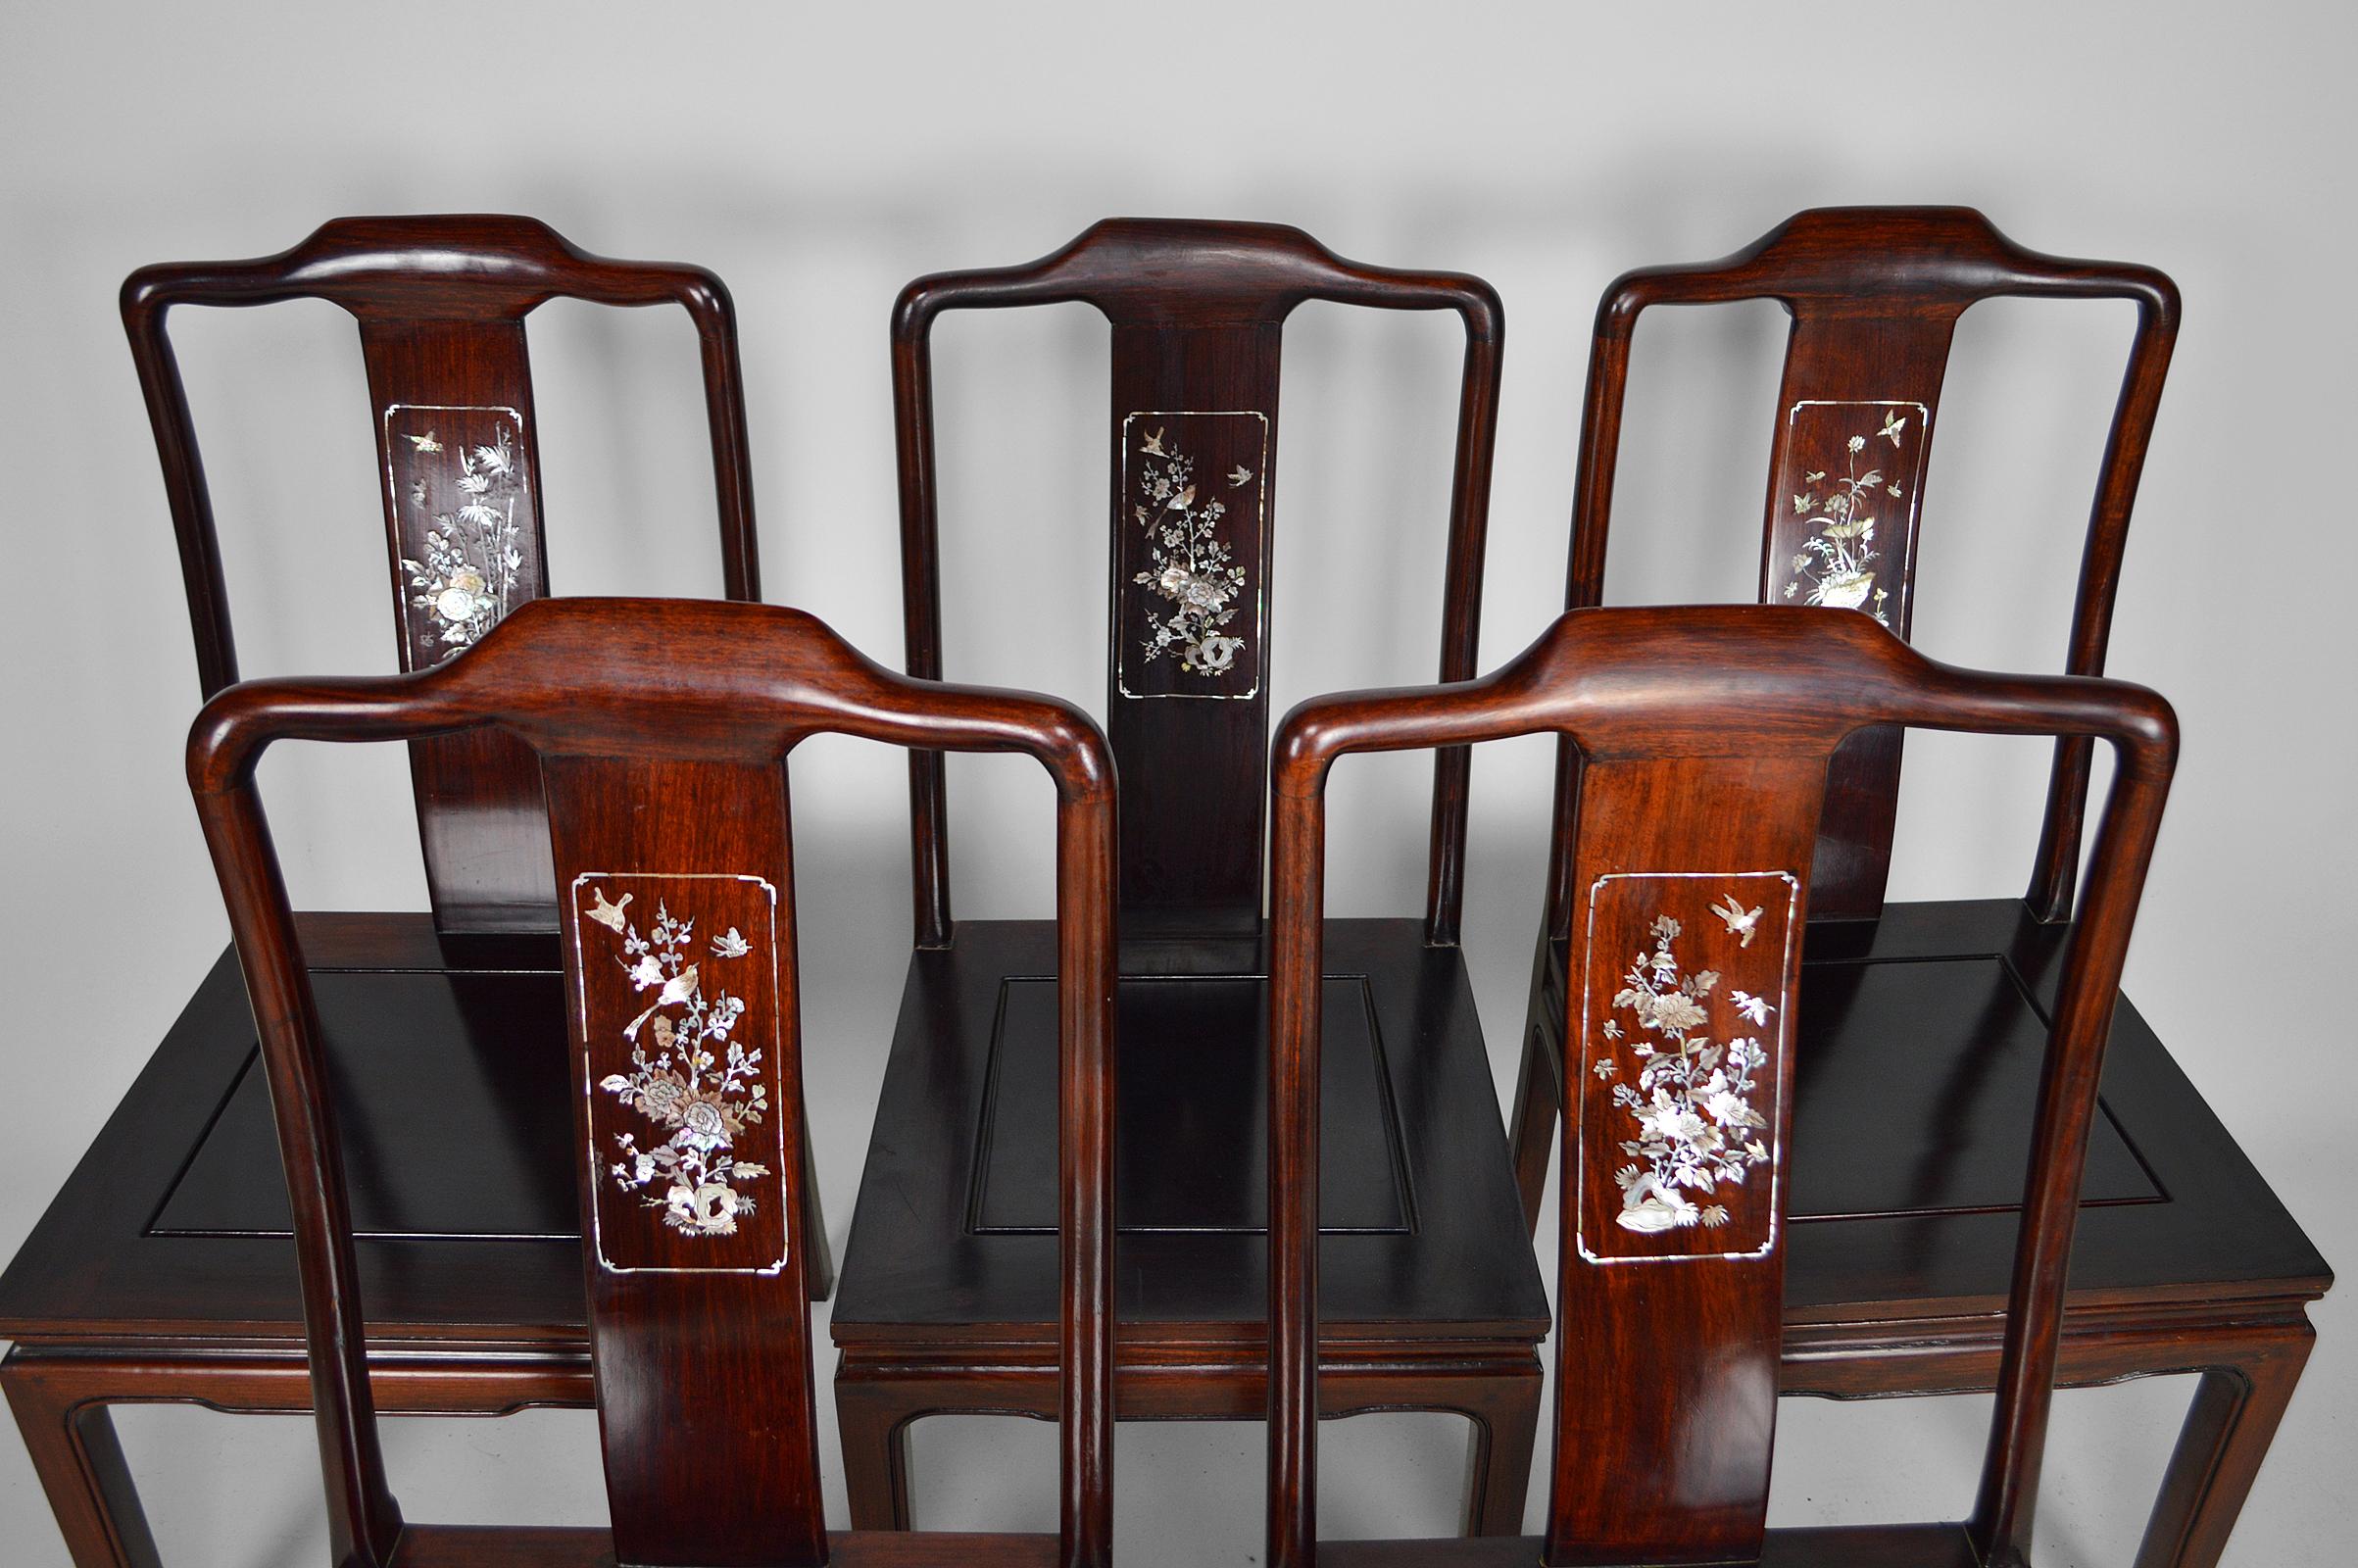 Chinese Export Set of 5 Asian Inlaid Wooden Chairs, Mid-20th Century